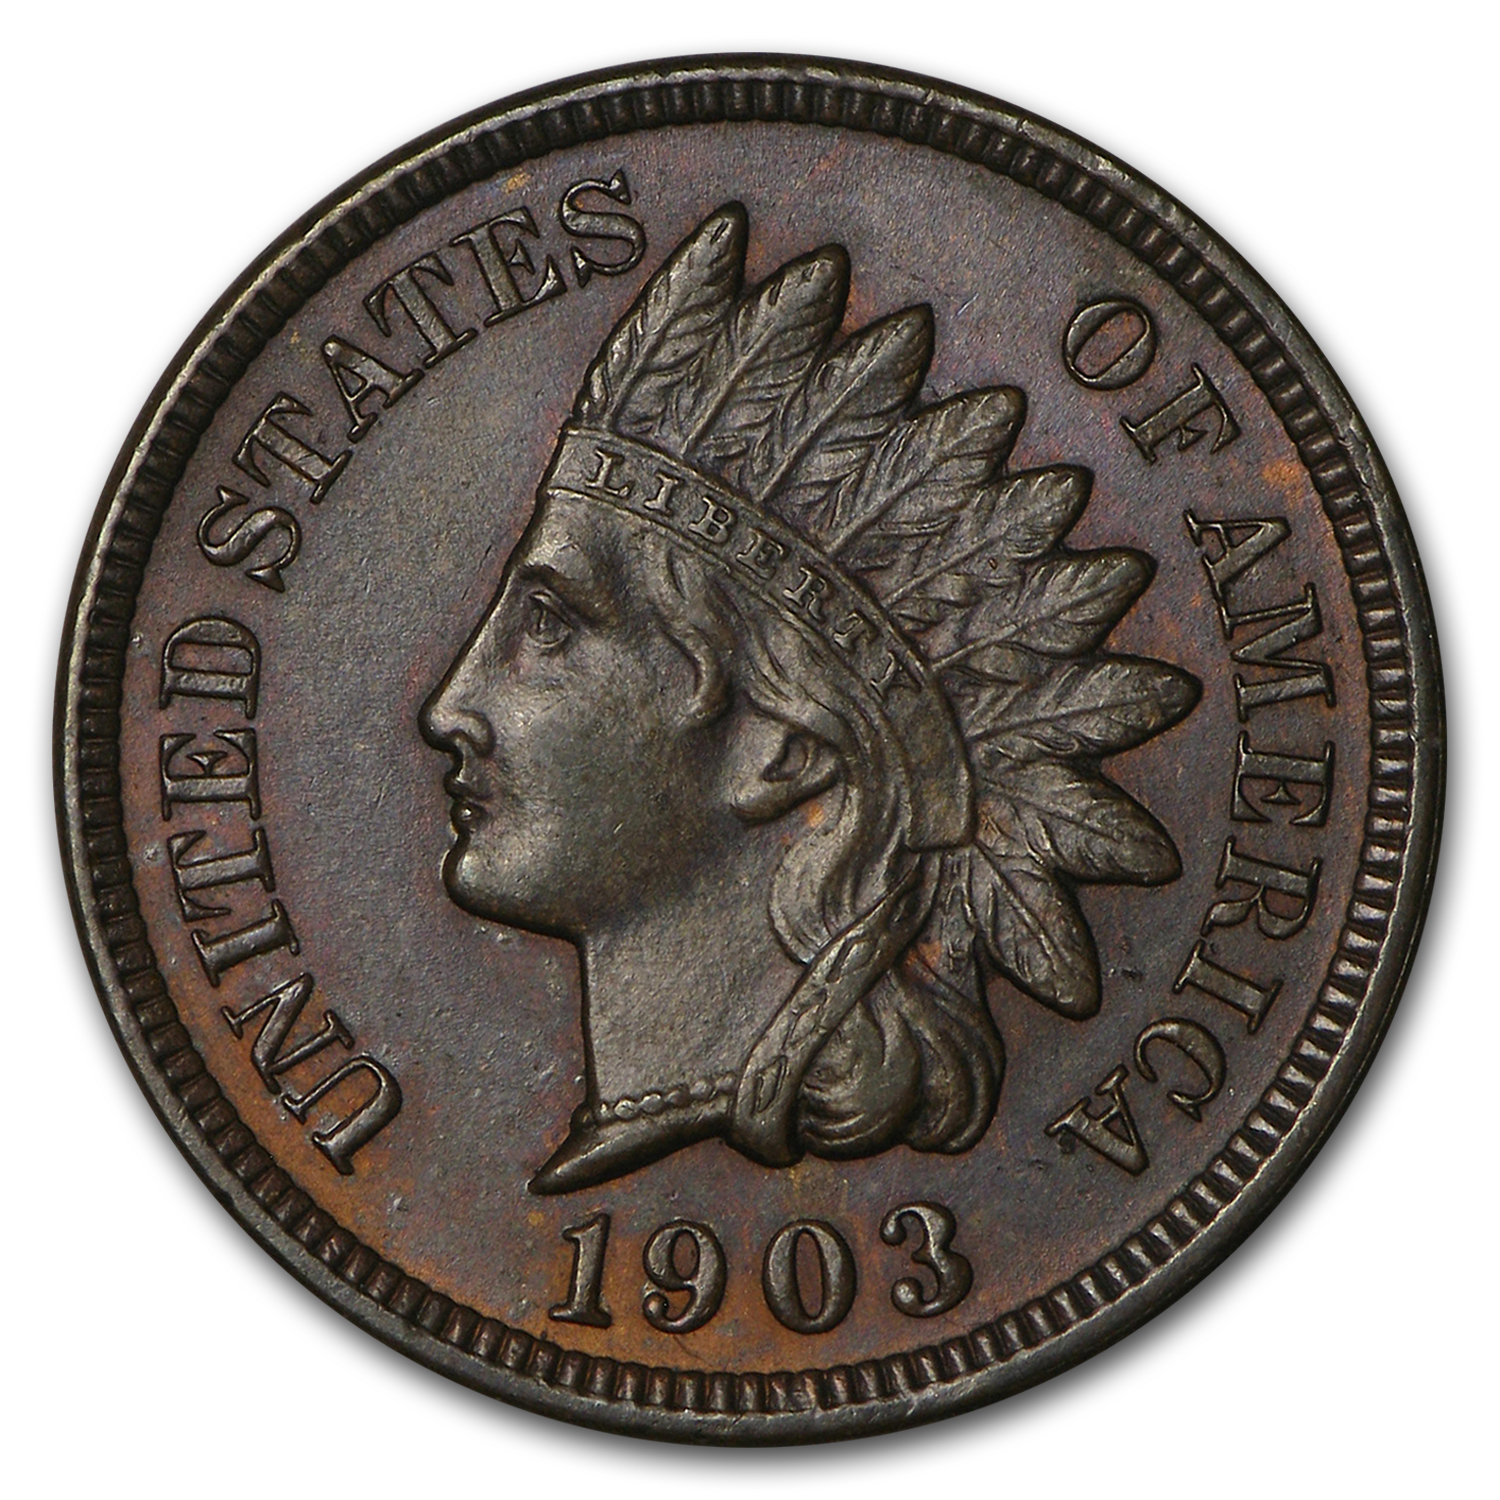 Buy 1903 Indian Head Cent BU (Brown) - Click Image to Close